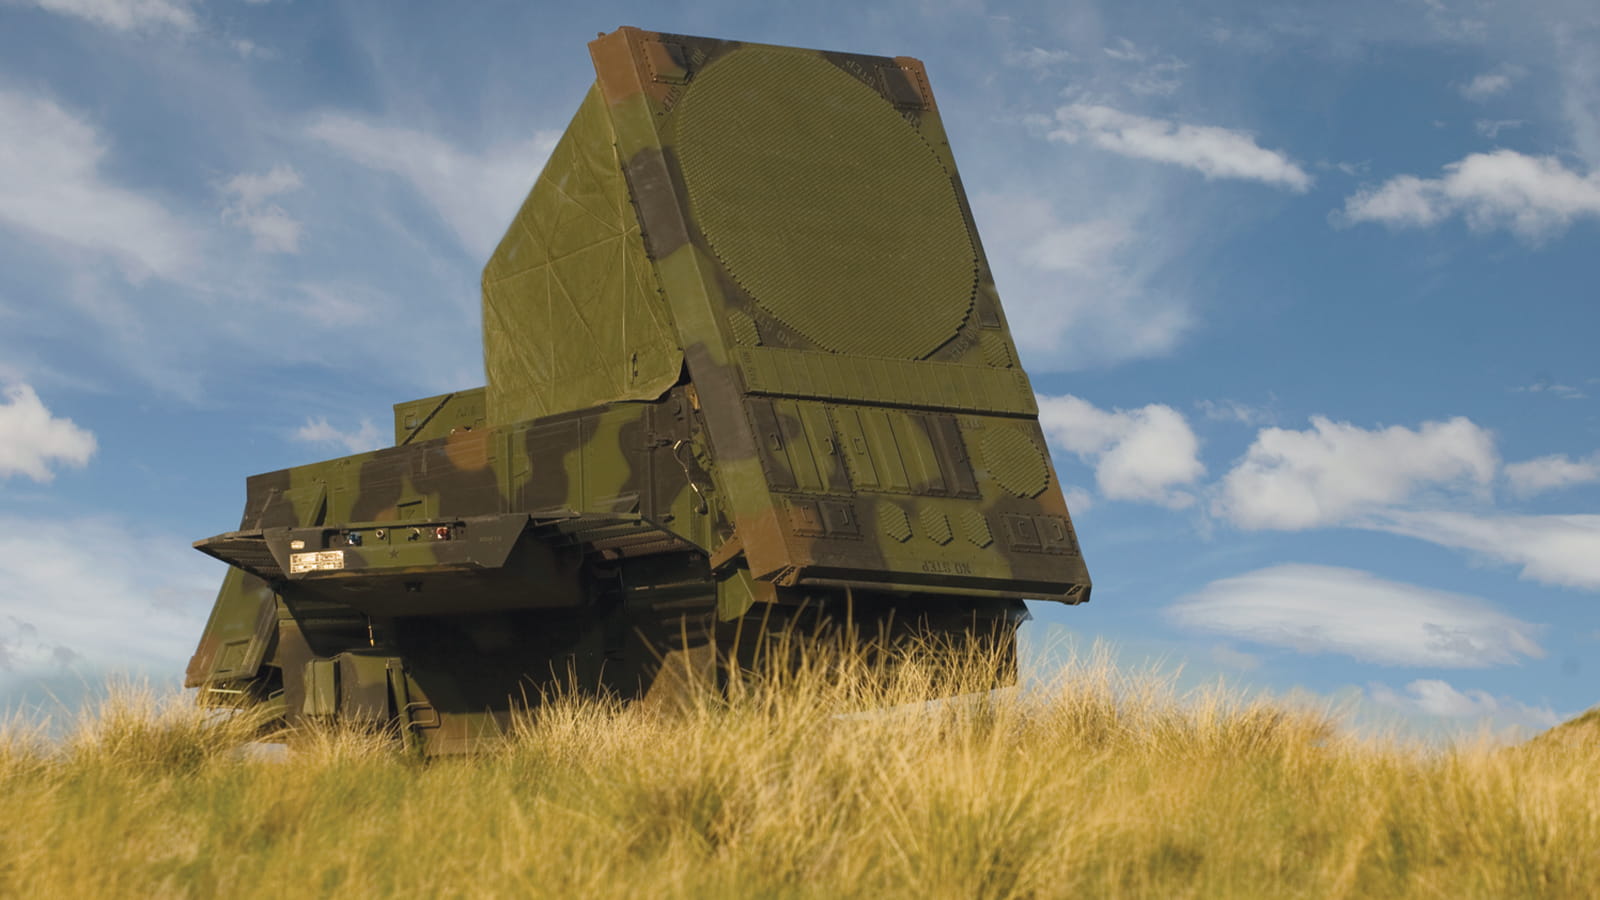 Patriot the combat-proven air and missile defense system. These new Patriot systems will augment Germany’s existing air defense infrastructure.